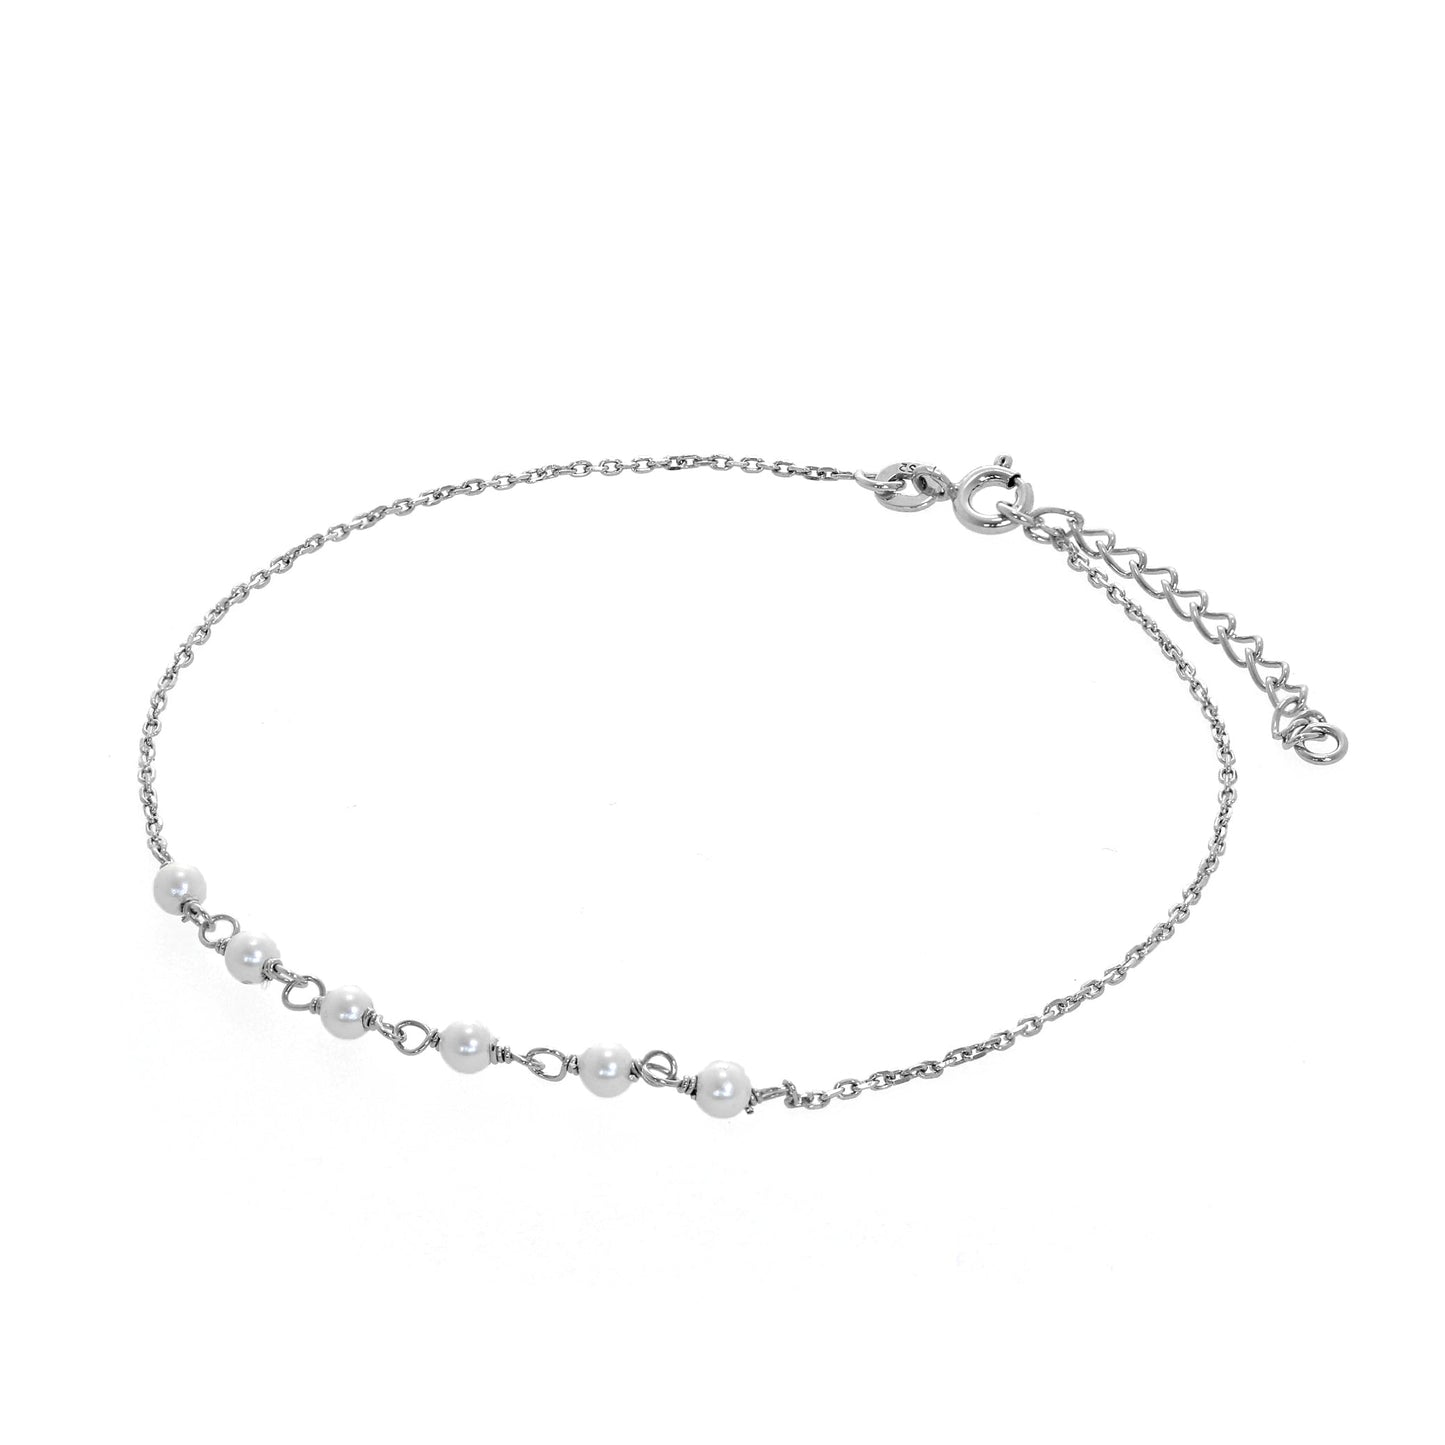 Sterling Silver & Pearl Hammered Trace Anklet 9 + 1.5 Inches